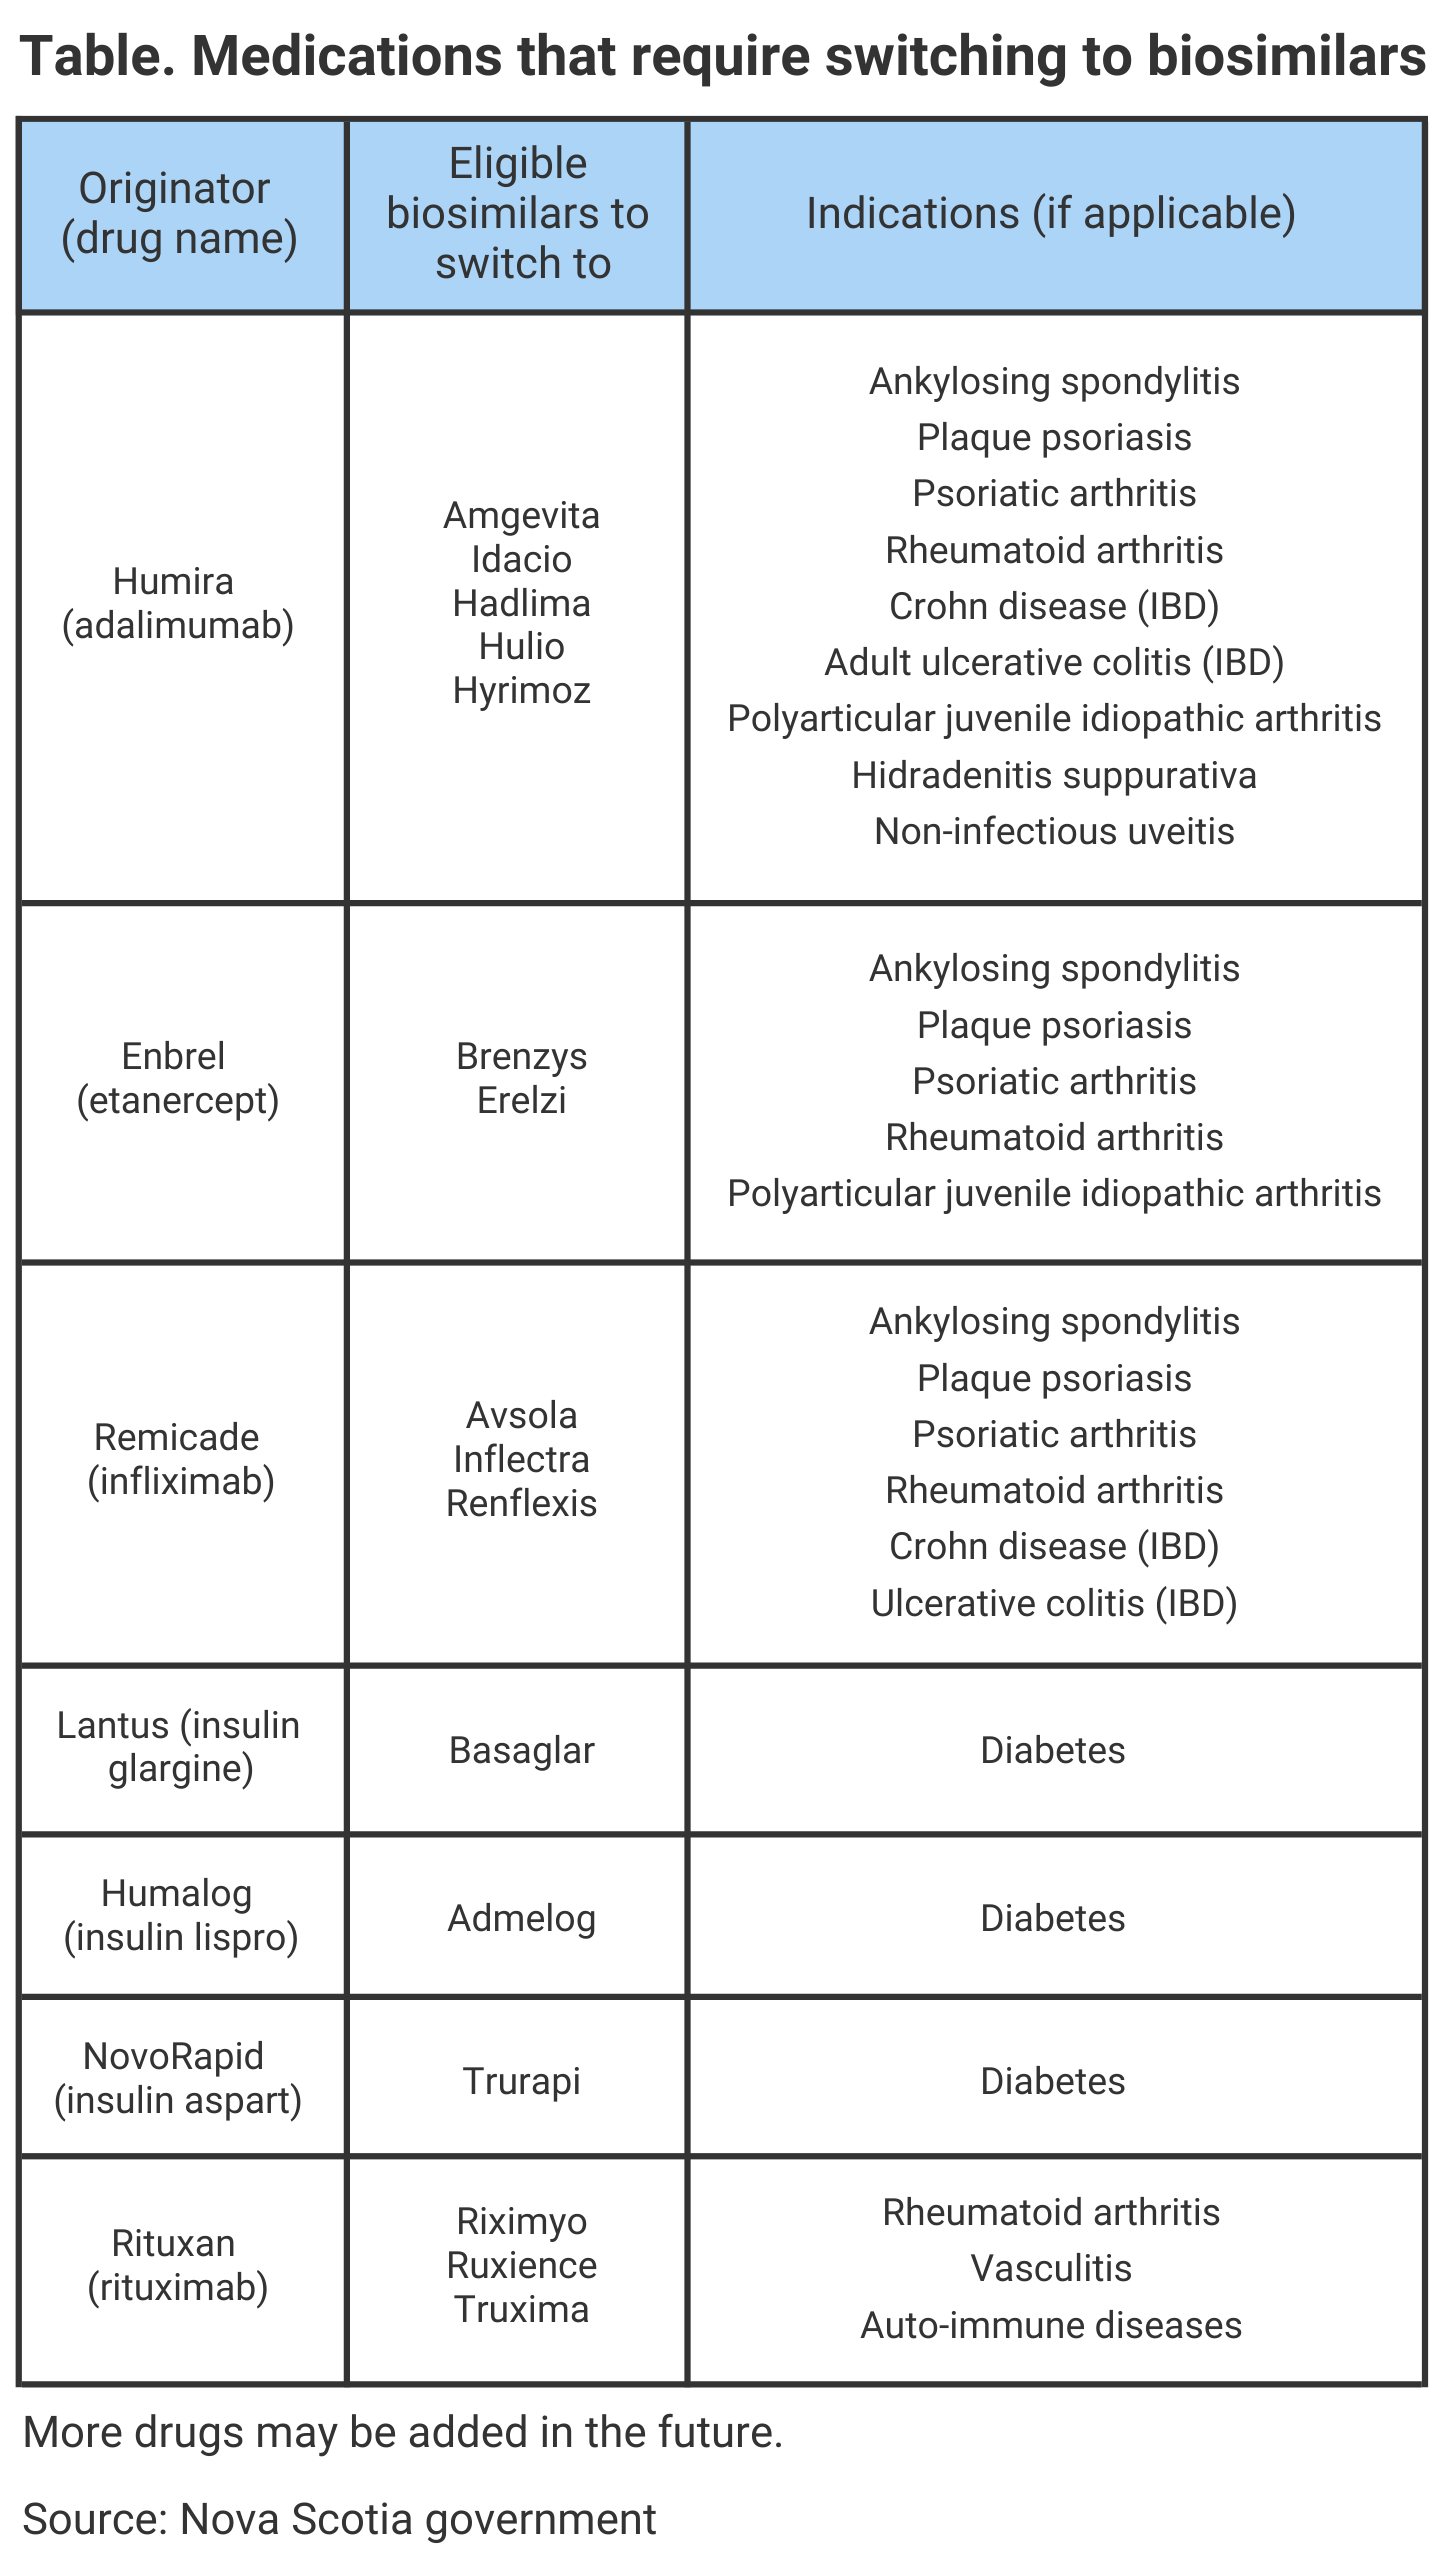 Table. Medications that require switching to biosimilars